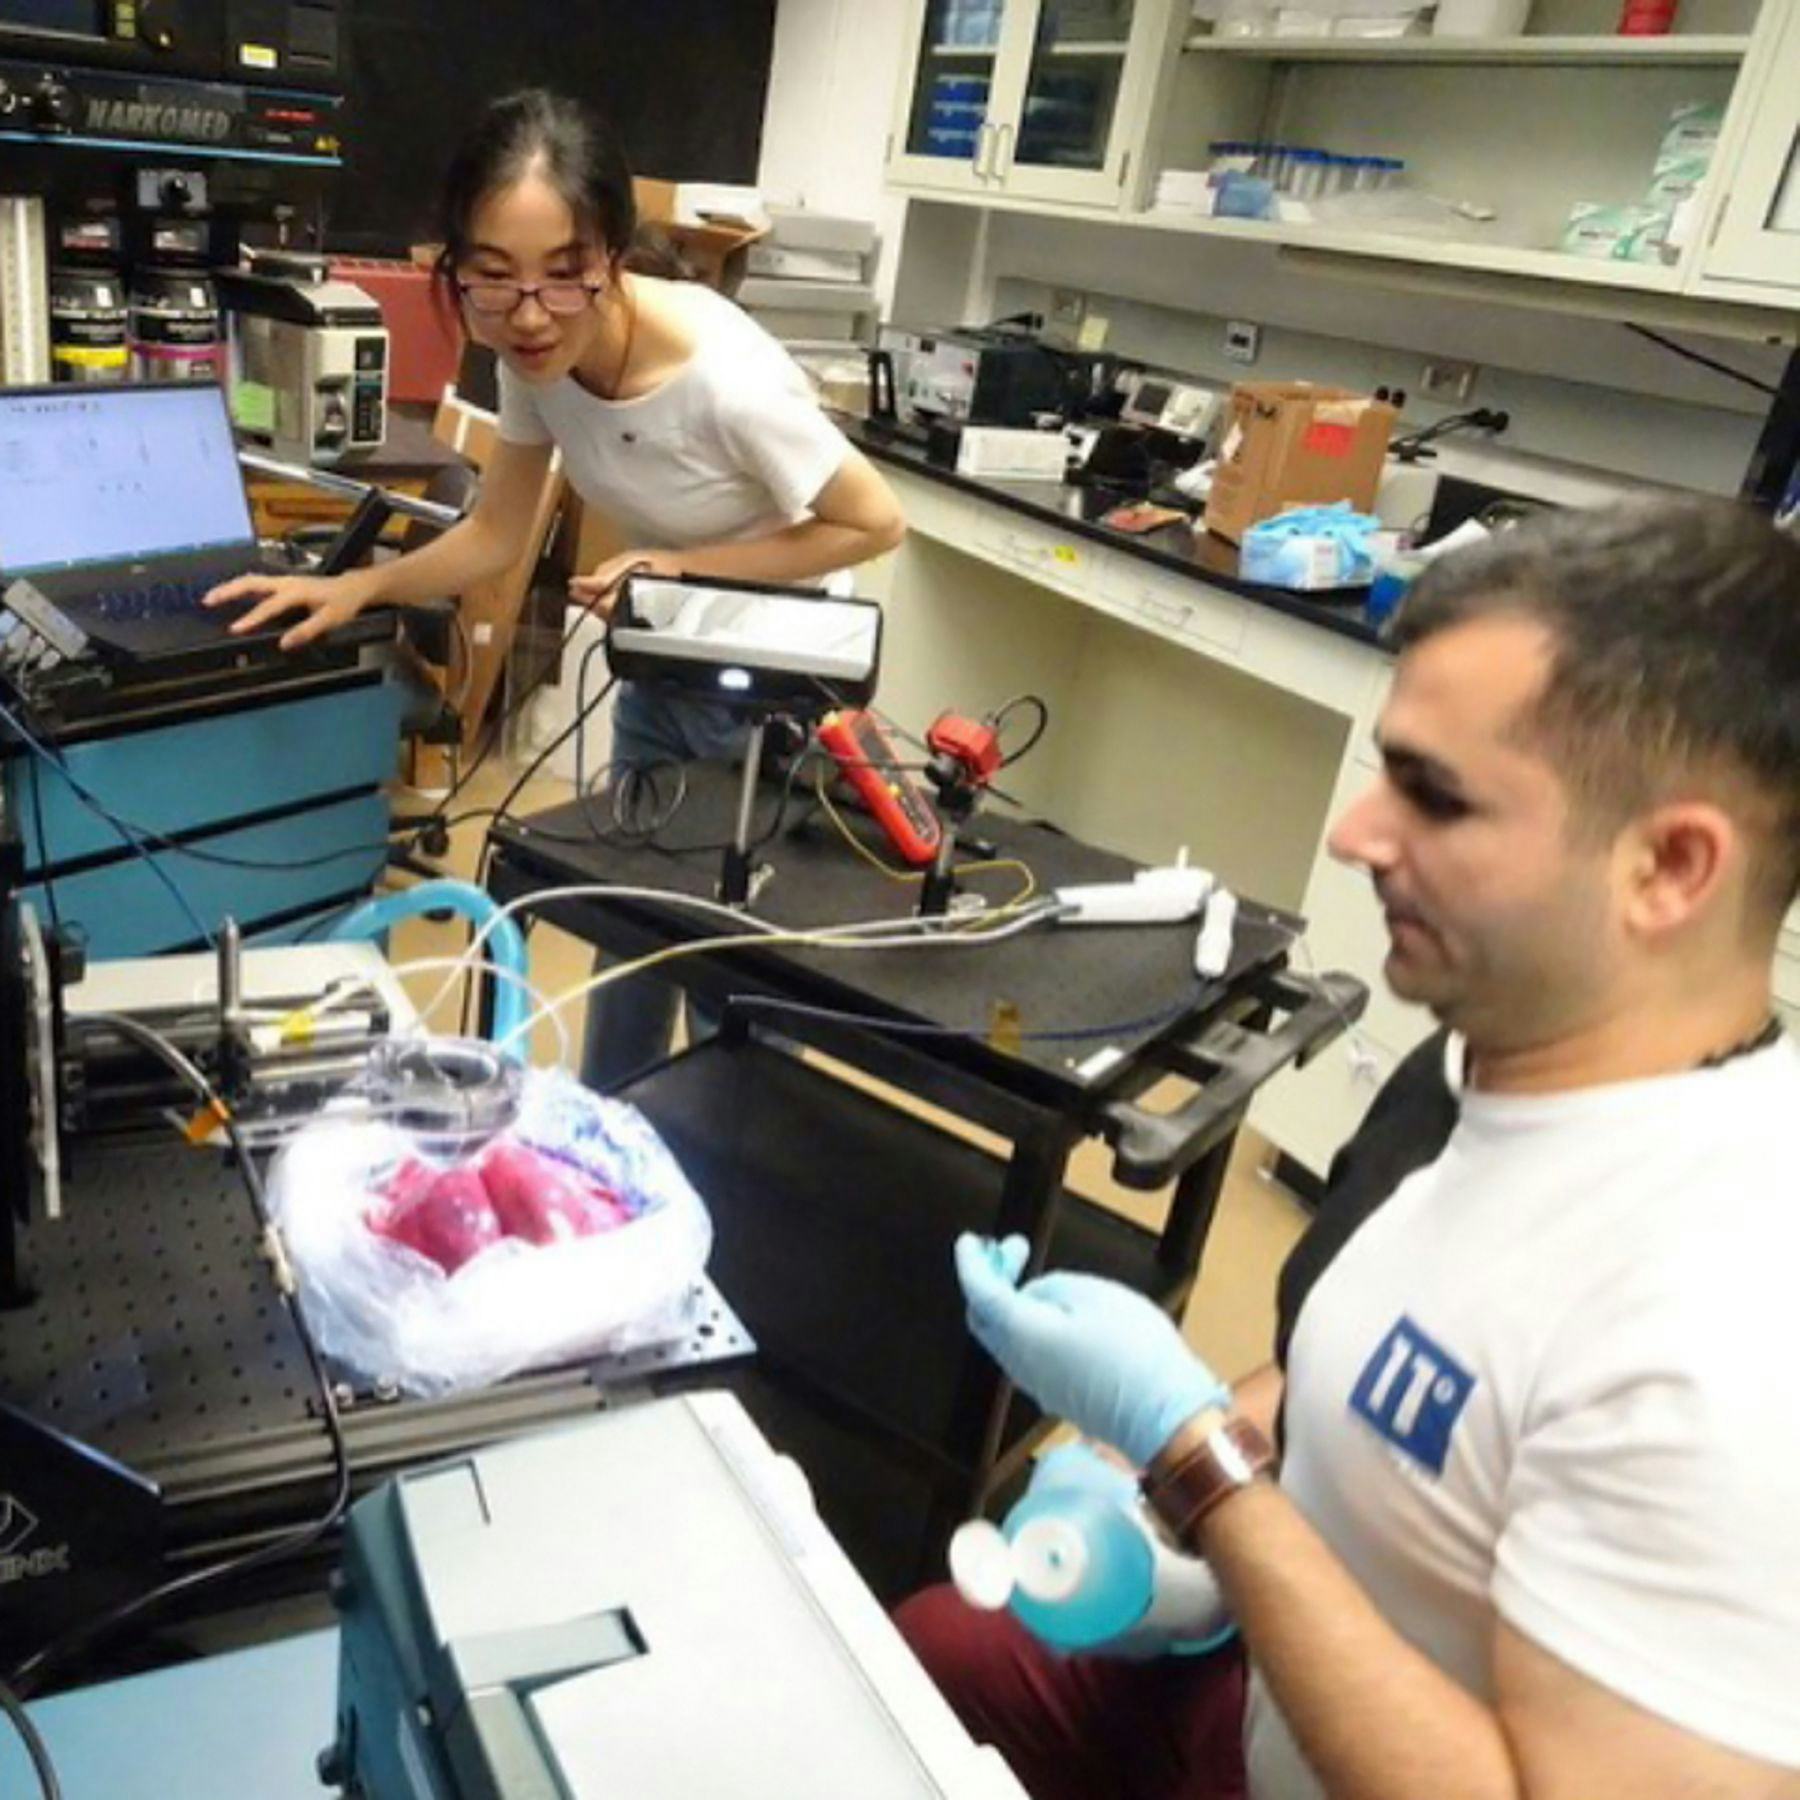 Mohammad and Jiawen working with swine lungs in the lab.